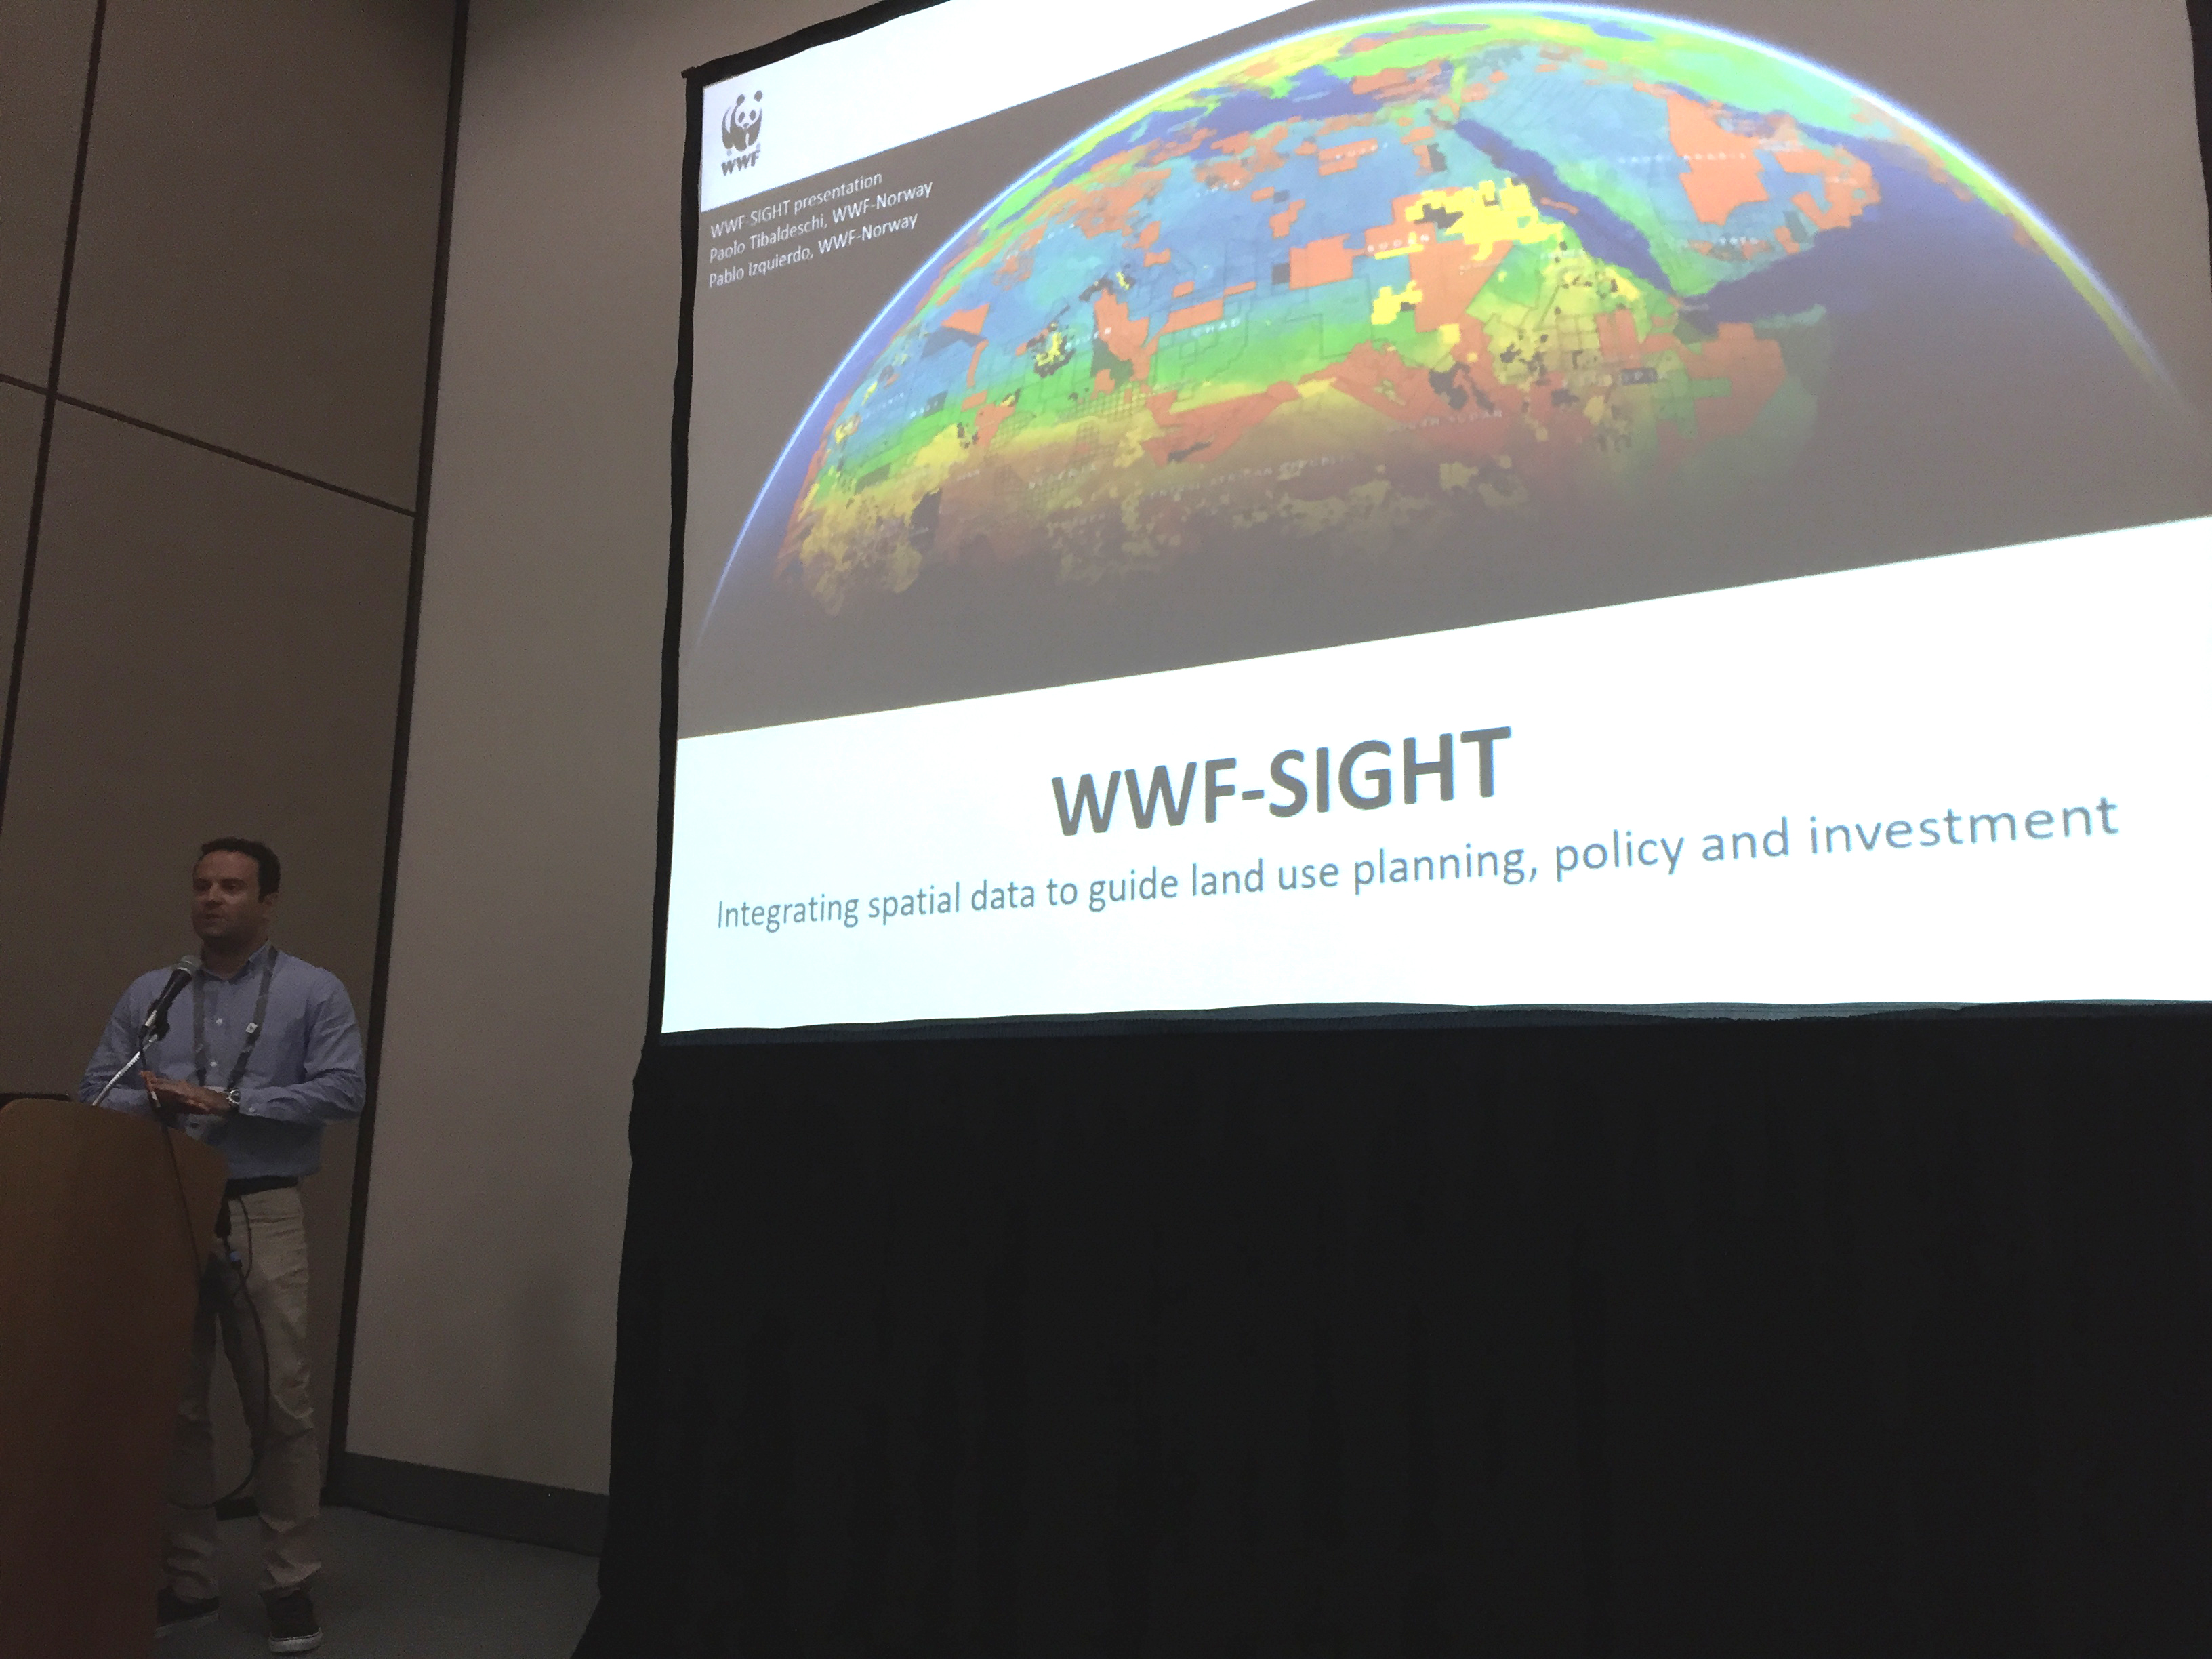 Paolo Tibaldeschi presenting WWF-SIGHT at one of the workshops at the ESRI UC 2017